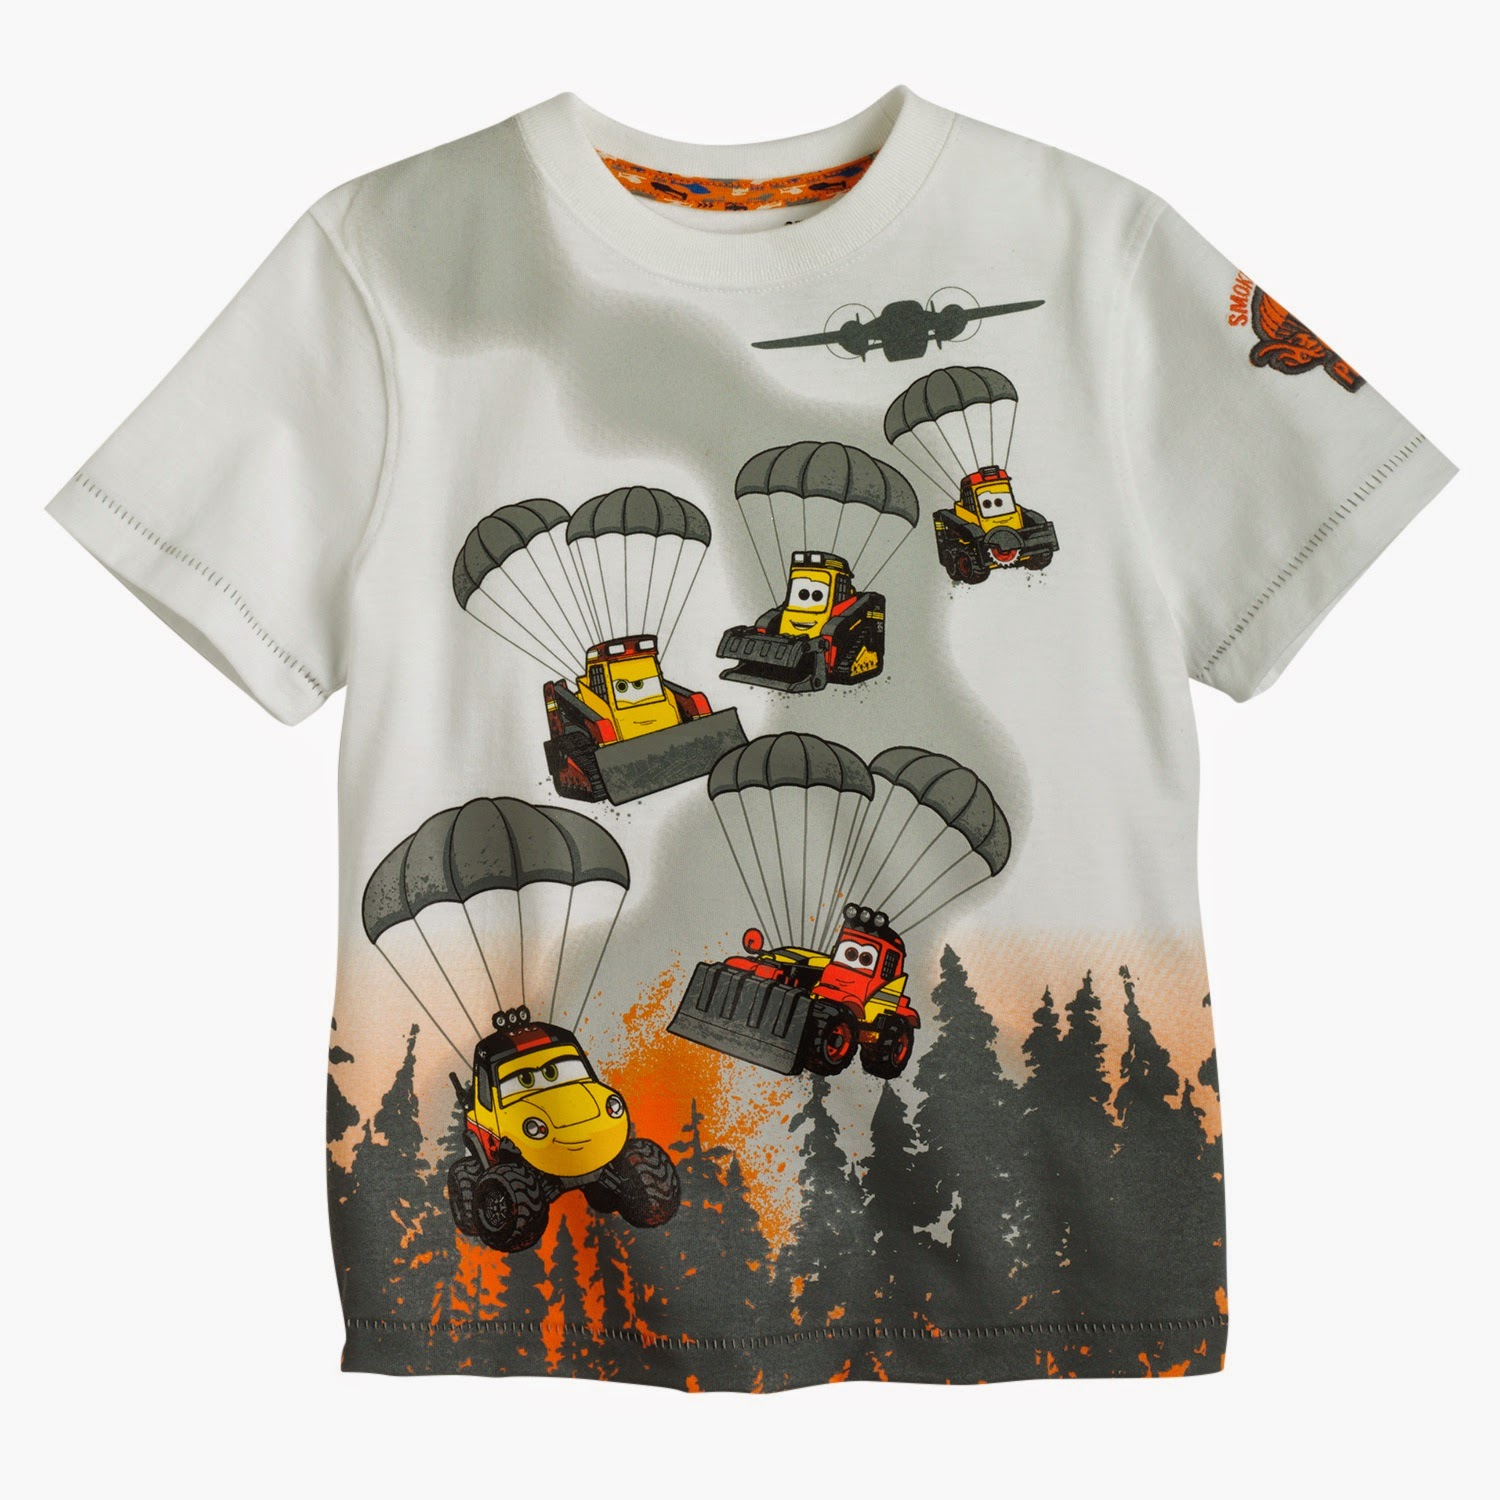 Limited Edition Disney Jumping Beans #FireAndRescue Smokejumper Parachute Tee at Kohl's | www.3Garnets2Sapphires.com #MagicAtPlay